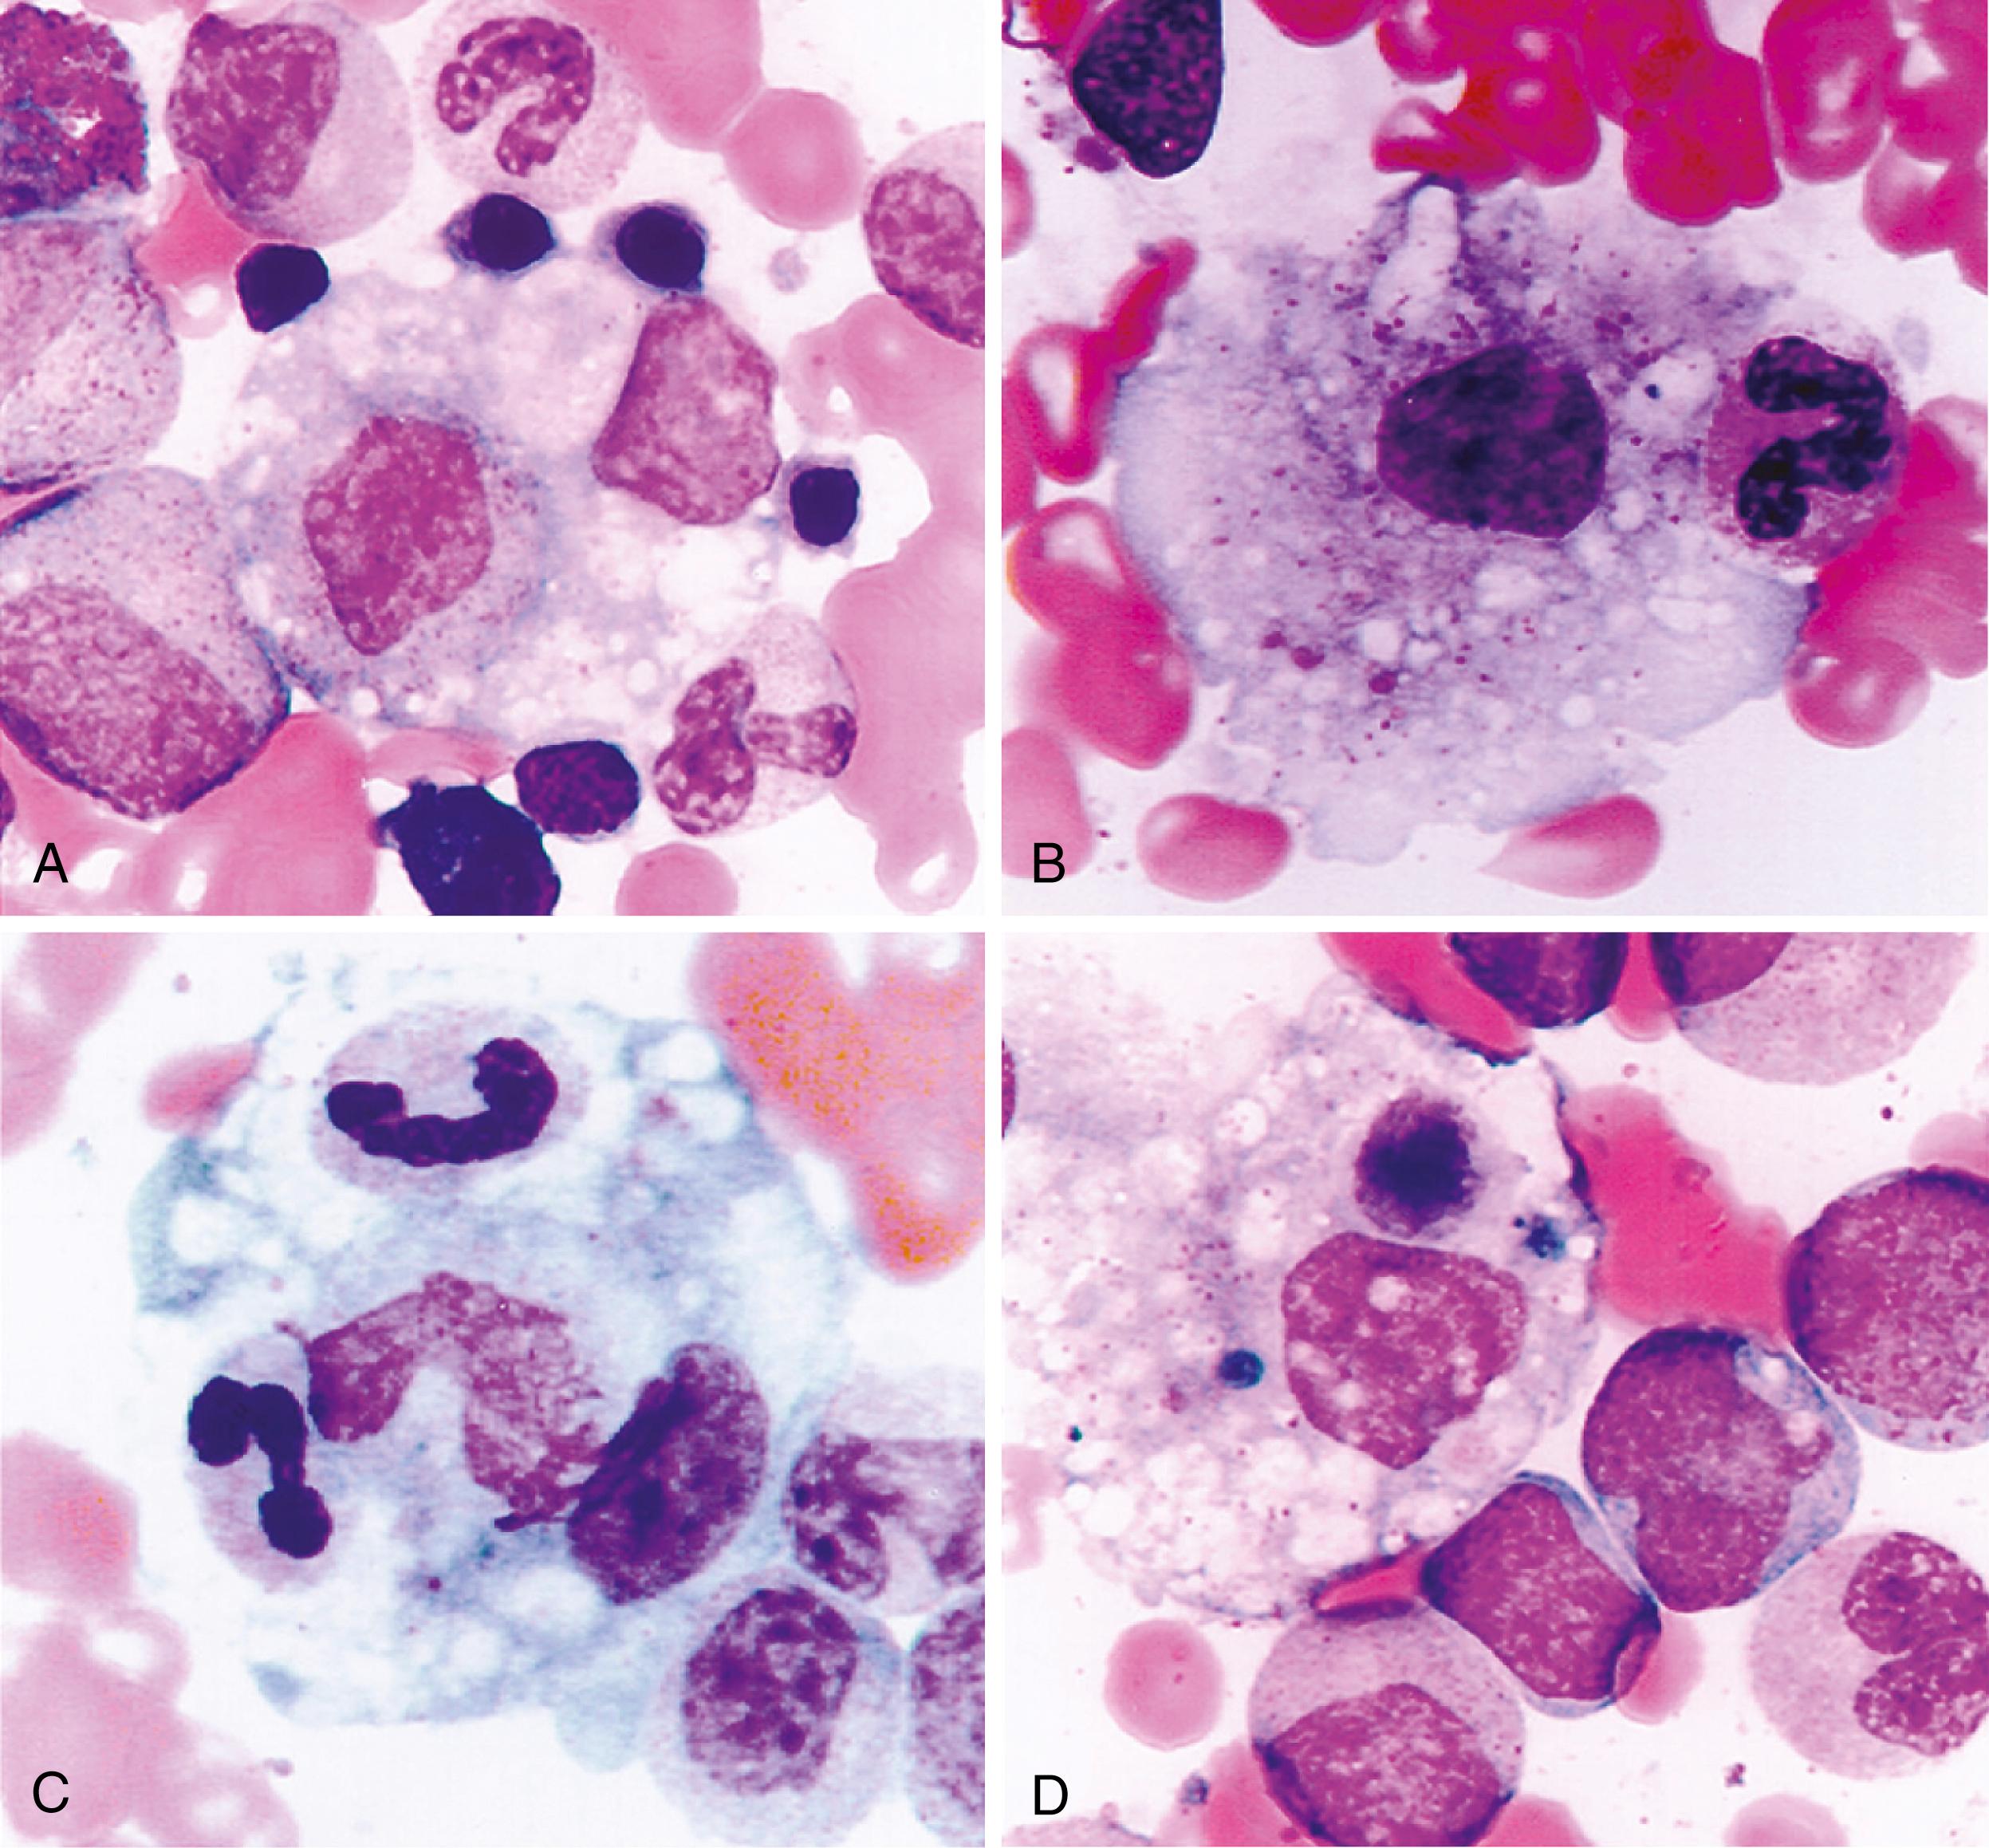 Fig. 42.1, Activated macrophages phagocytosing hematopoietic elements in the bone marrow of a systemic juvenile idiopathic arthritis (JIA) patient with macrophage activation syndrome (MAS). Bone marrow aspirate specimen revealing activated macrophages (H&E stain, original magnification × 1000). A, Myelocyte within activated macrophage. There are also multiple adherent red blood cell and myeloid precursors. B, Activated macrophage engulfing a neutrophilic band form. C, Neutrophilic band forms and metamyelocyte within an activated macrophage. Nuclei of band forms appear condensed, a result of destruction. D, Activated macrophage with hemosiderin deposits and a degenerating phagocytosed nucleated cell.